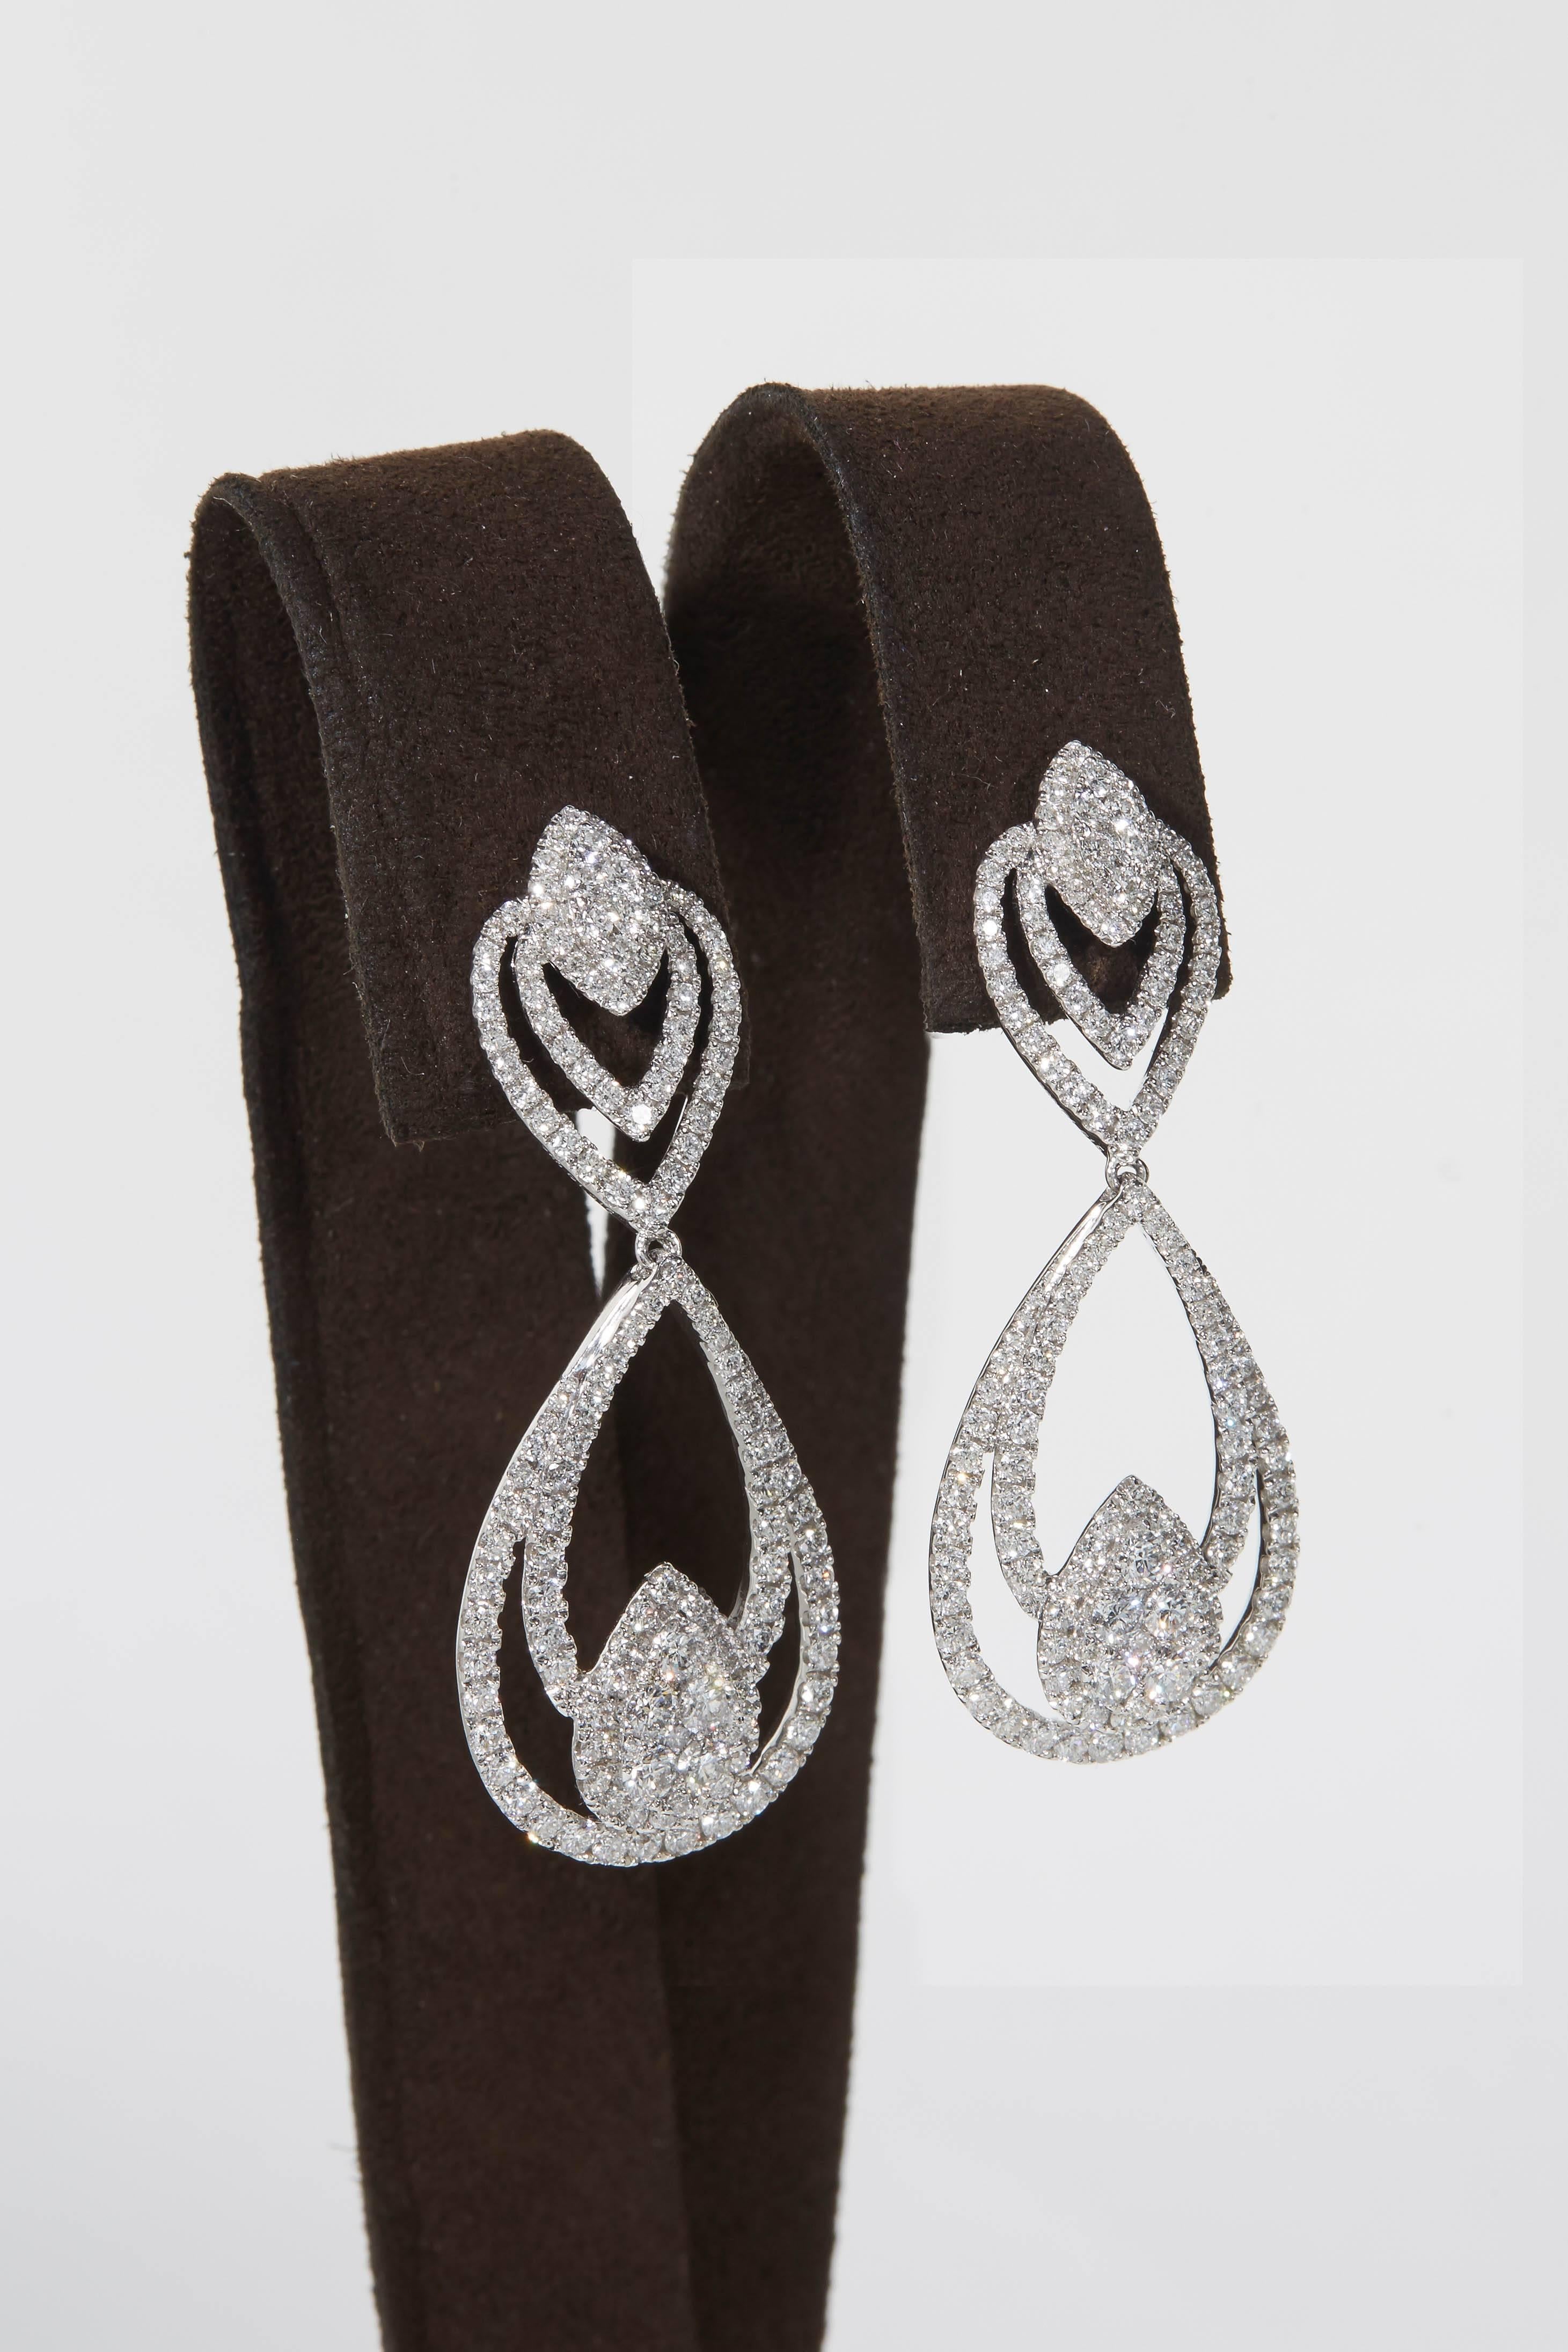 
A fabulous diamond drop earring. 

3.84 carats of white round brilliant cut diamonds set in 18k white gold.

Approximately 1.77 inches in length, just under an inch wide at its widest point. 